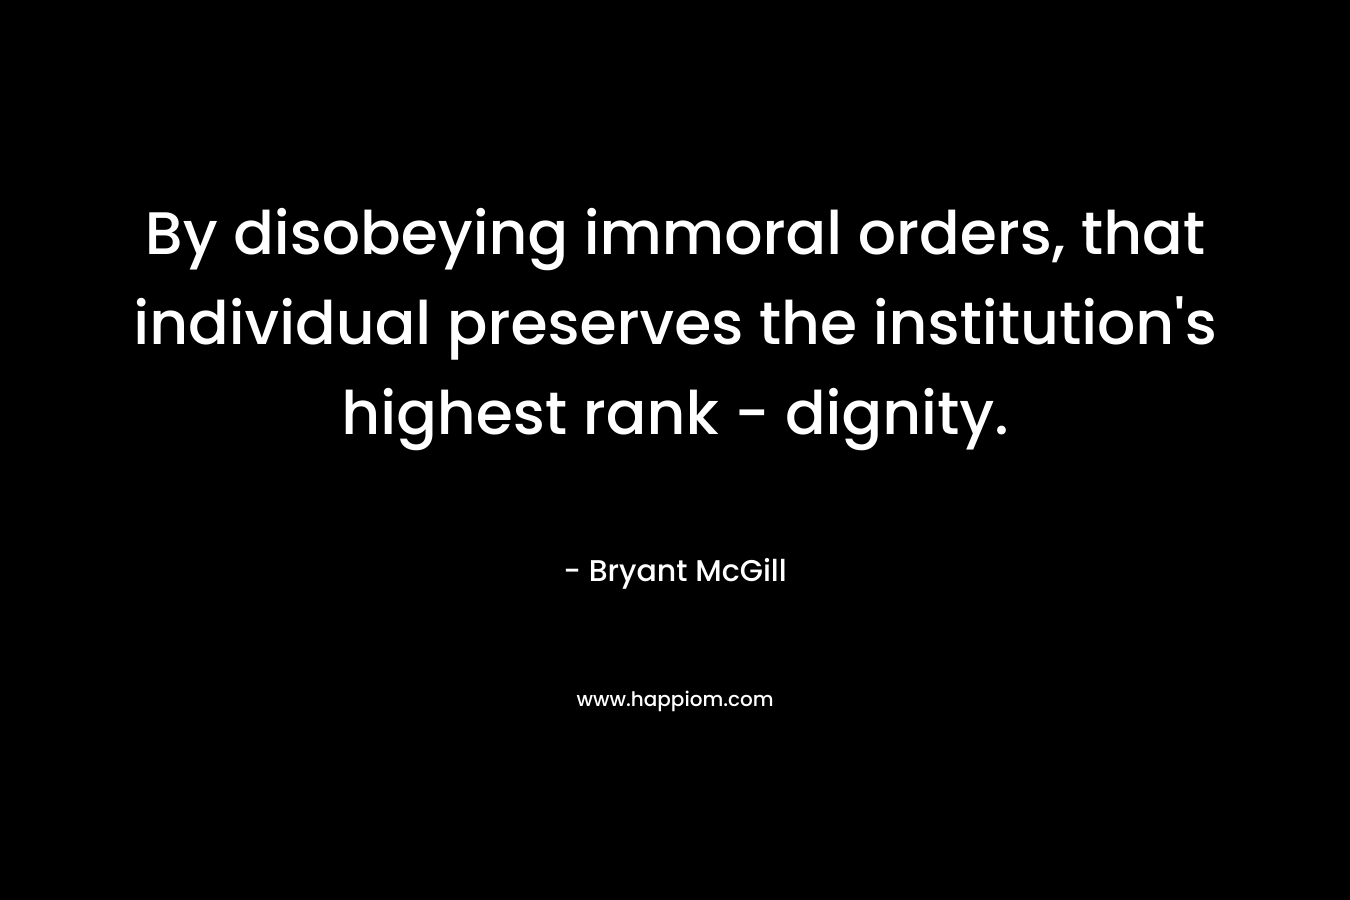 By disobeying immoral orders, that individual preserves the institution's highest rank - dignity.